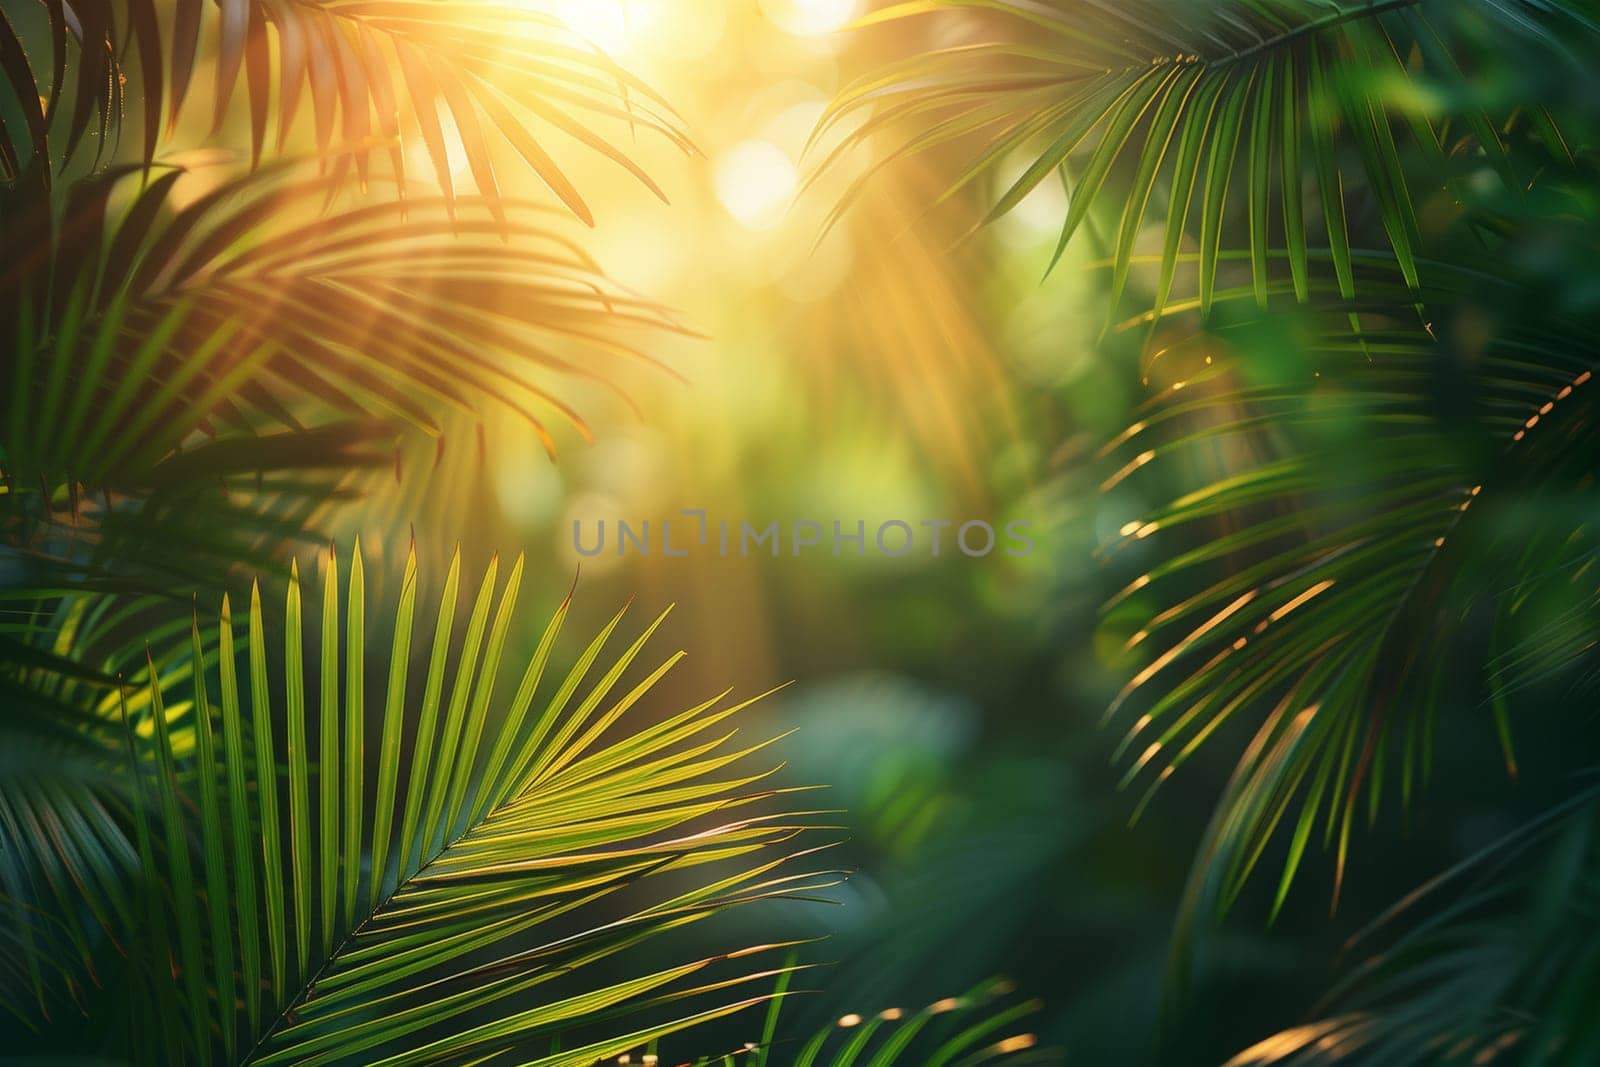 Bright sunlight filtering through the green leaves of a palm tree, creating a dappled pattern on the ground below.